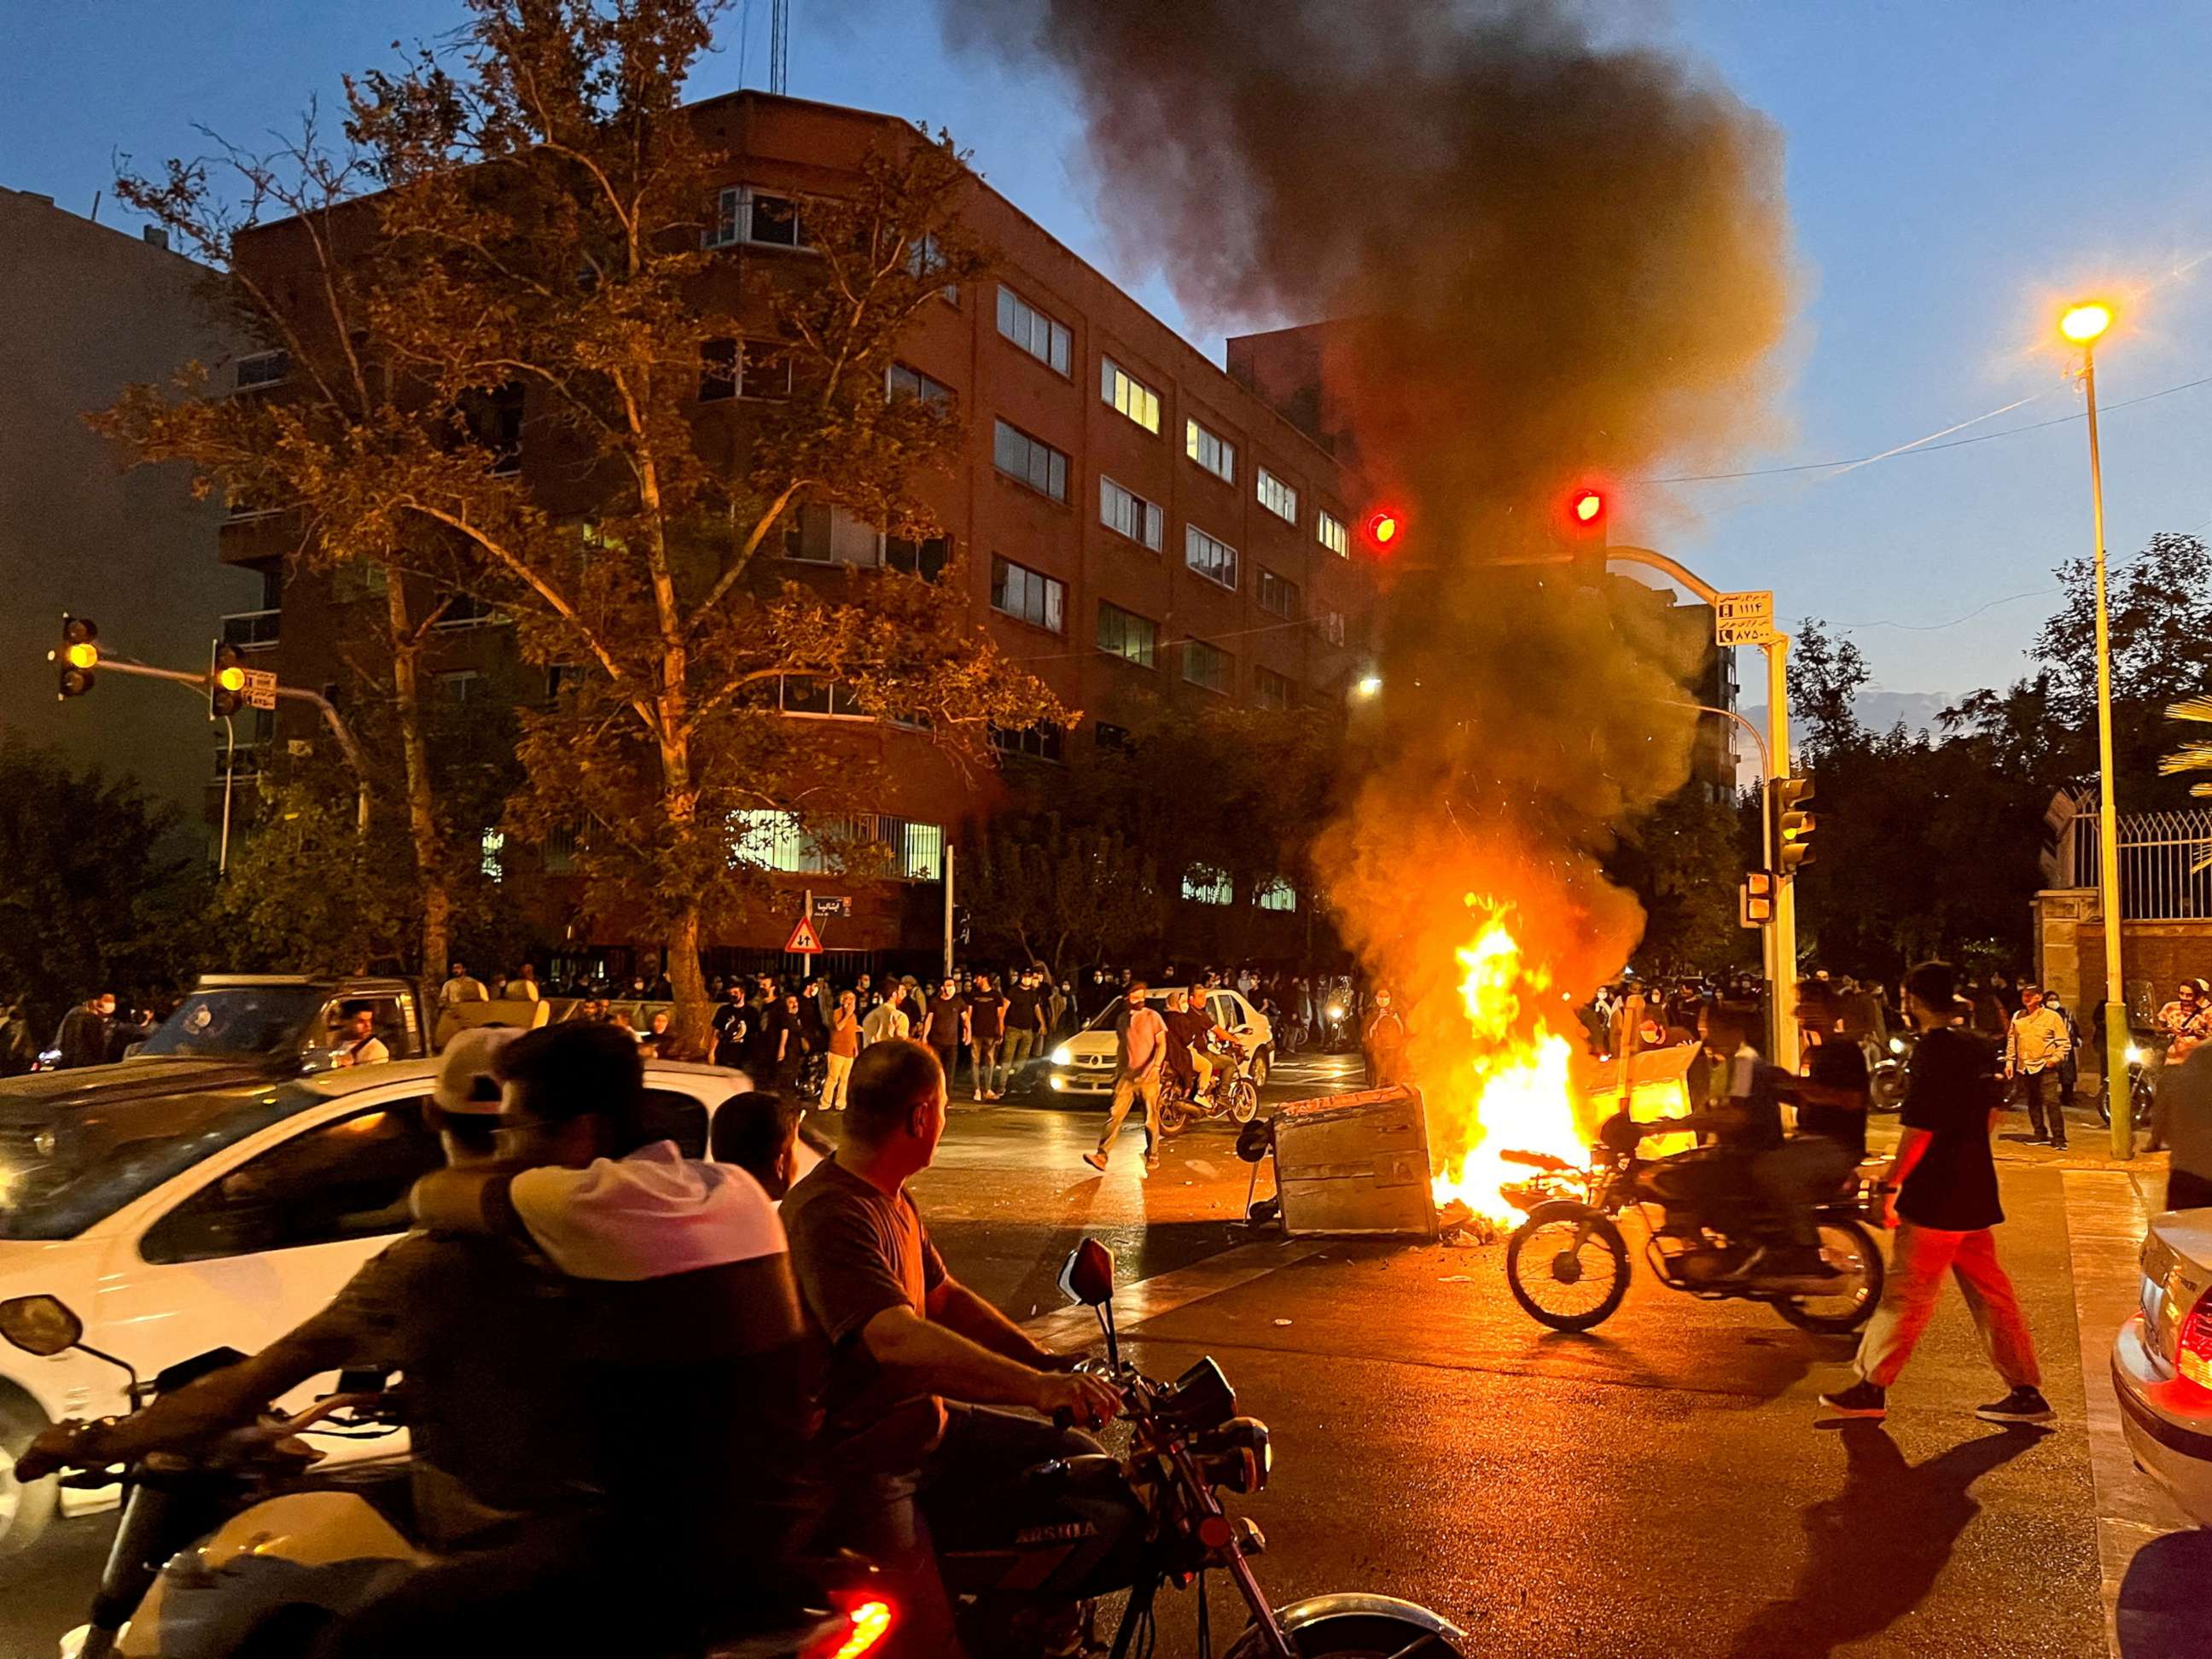 PHOTO: A police motorcycle burns during a protest over the death of Mahsa Amini, a woman who died after being arrested by the Islamic republic's "morality police", in Tehran, Iran Sept. 19, 2022.